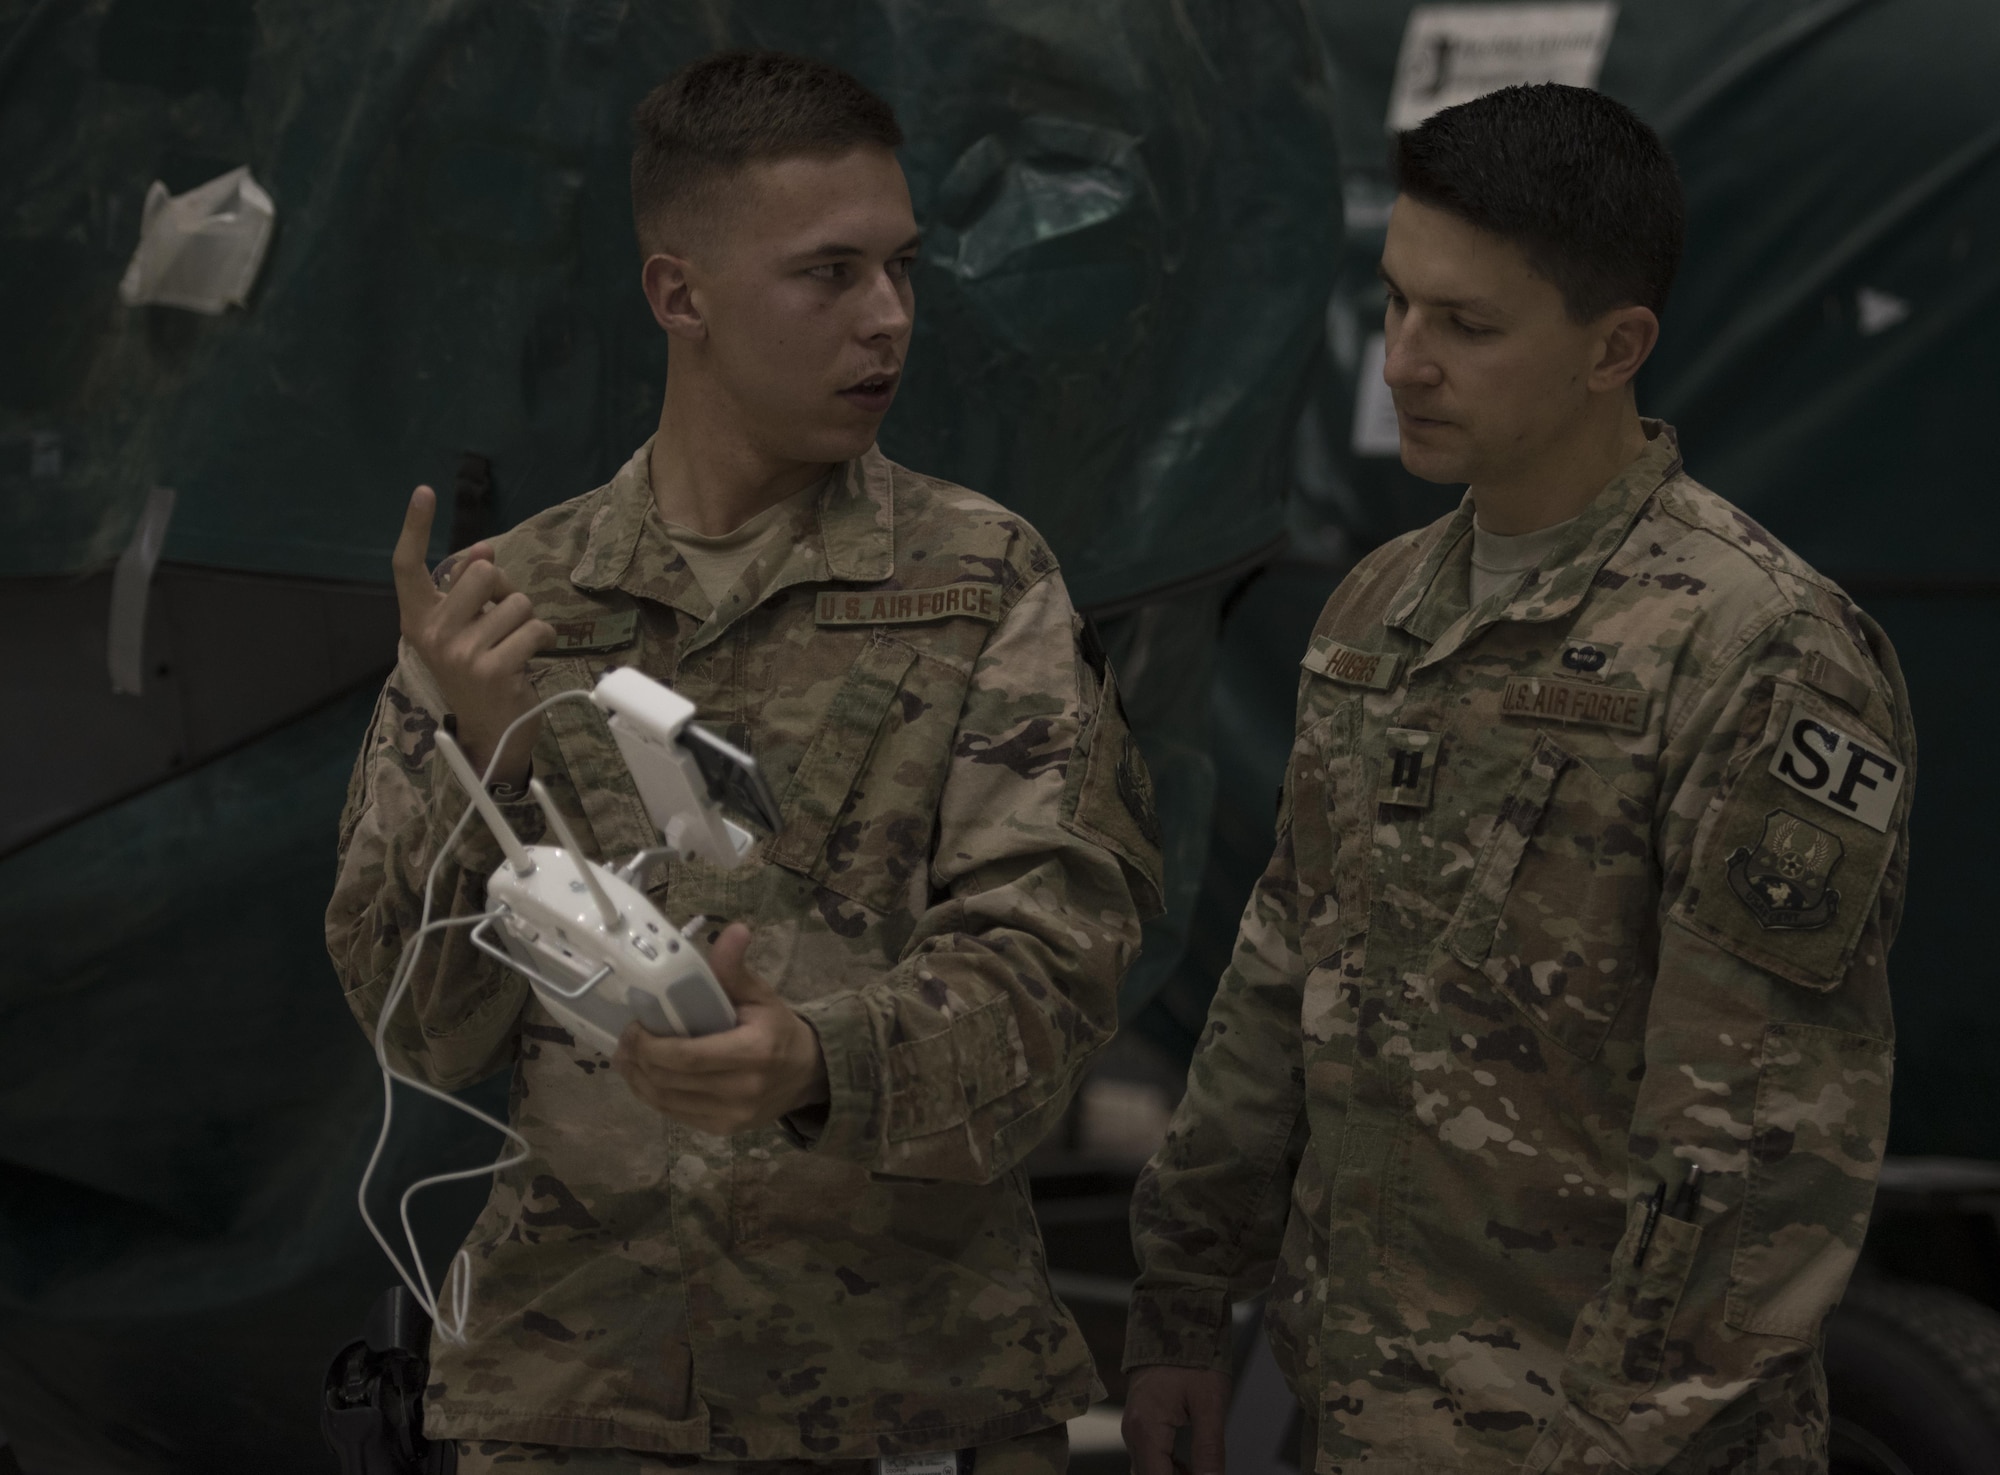 Airman 1st Class Brandon Cooper, 455th Expeditionary Security Forces Squadron, explains the unmanned aircraft systems program to then-Capt. Tyler Hughes, the 455th ESFS commander, during a live-demonstration at Bagram Airfield, Afghanistan, June 30, 2017. The 455th ESFS teamed up with a researcher from the Air Force Research Lab to teach Airmen how to pilot drones and use them to train coalition partners on how to react to them on the battlefield. (U.S. Air Force photo by Staff Sgt. Benjamin Gonsier) 